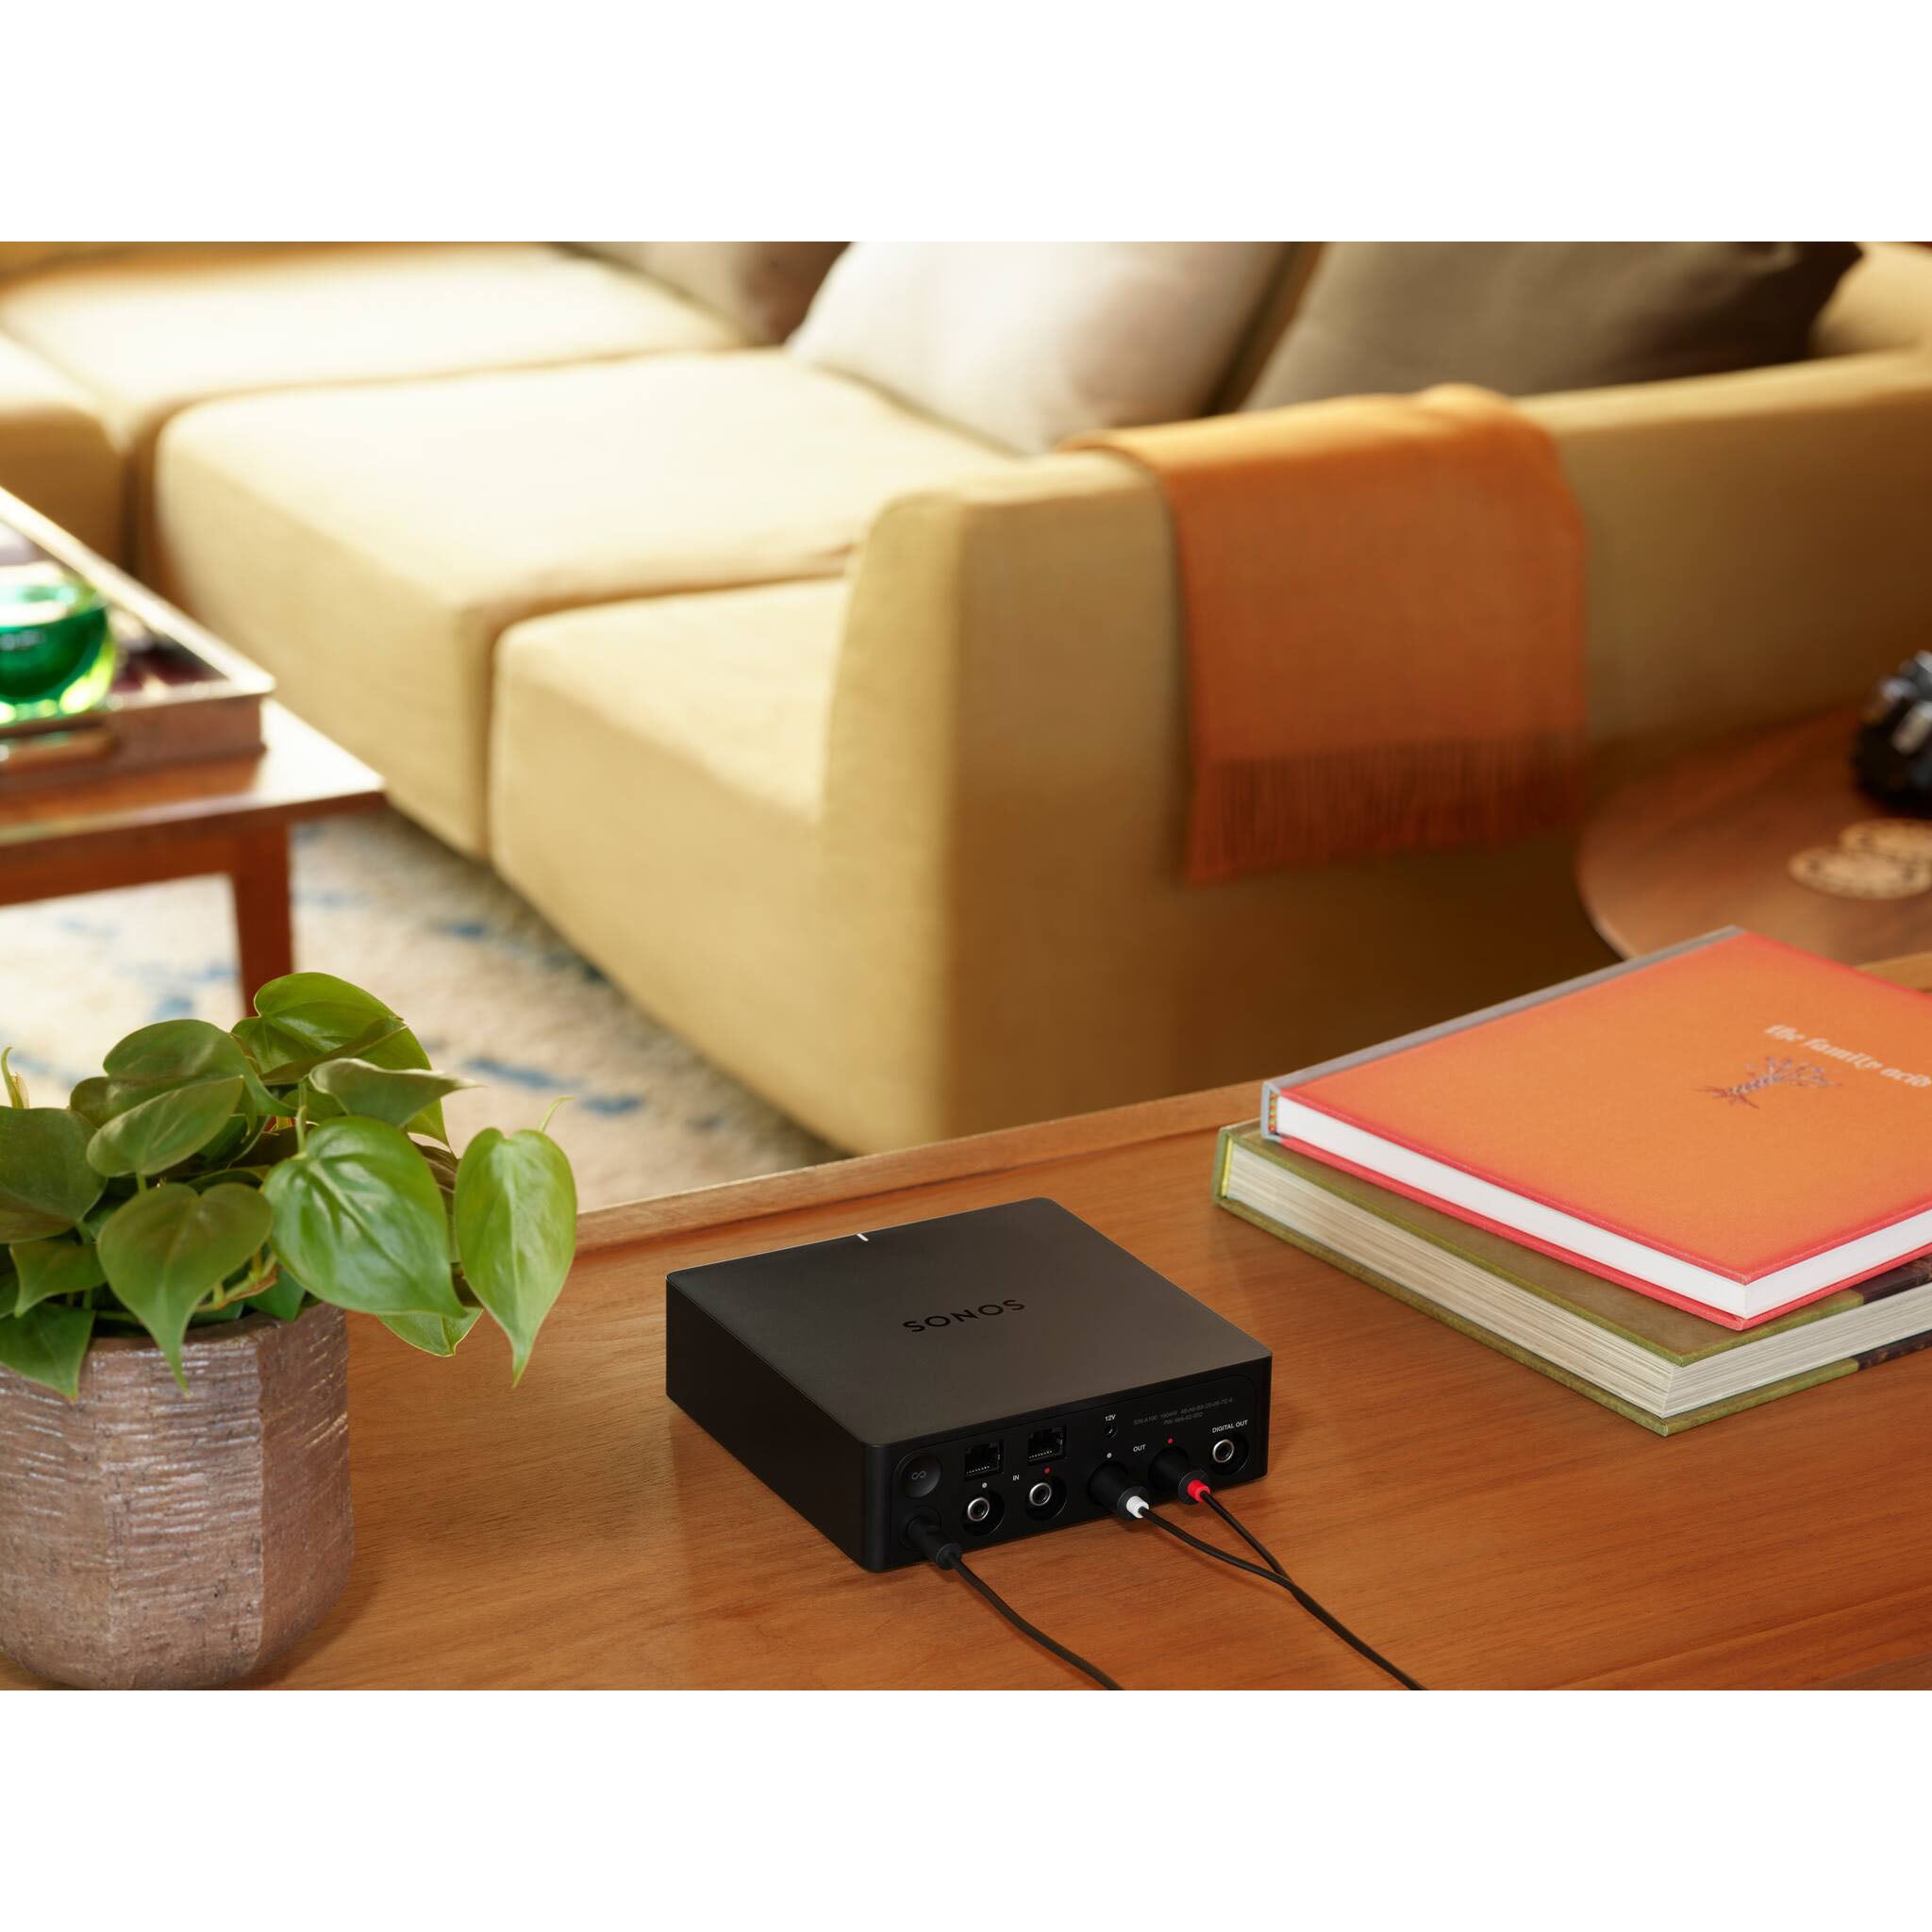 Sonos Port - A WiFi Network Streamer with Built-in DAC